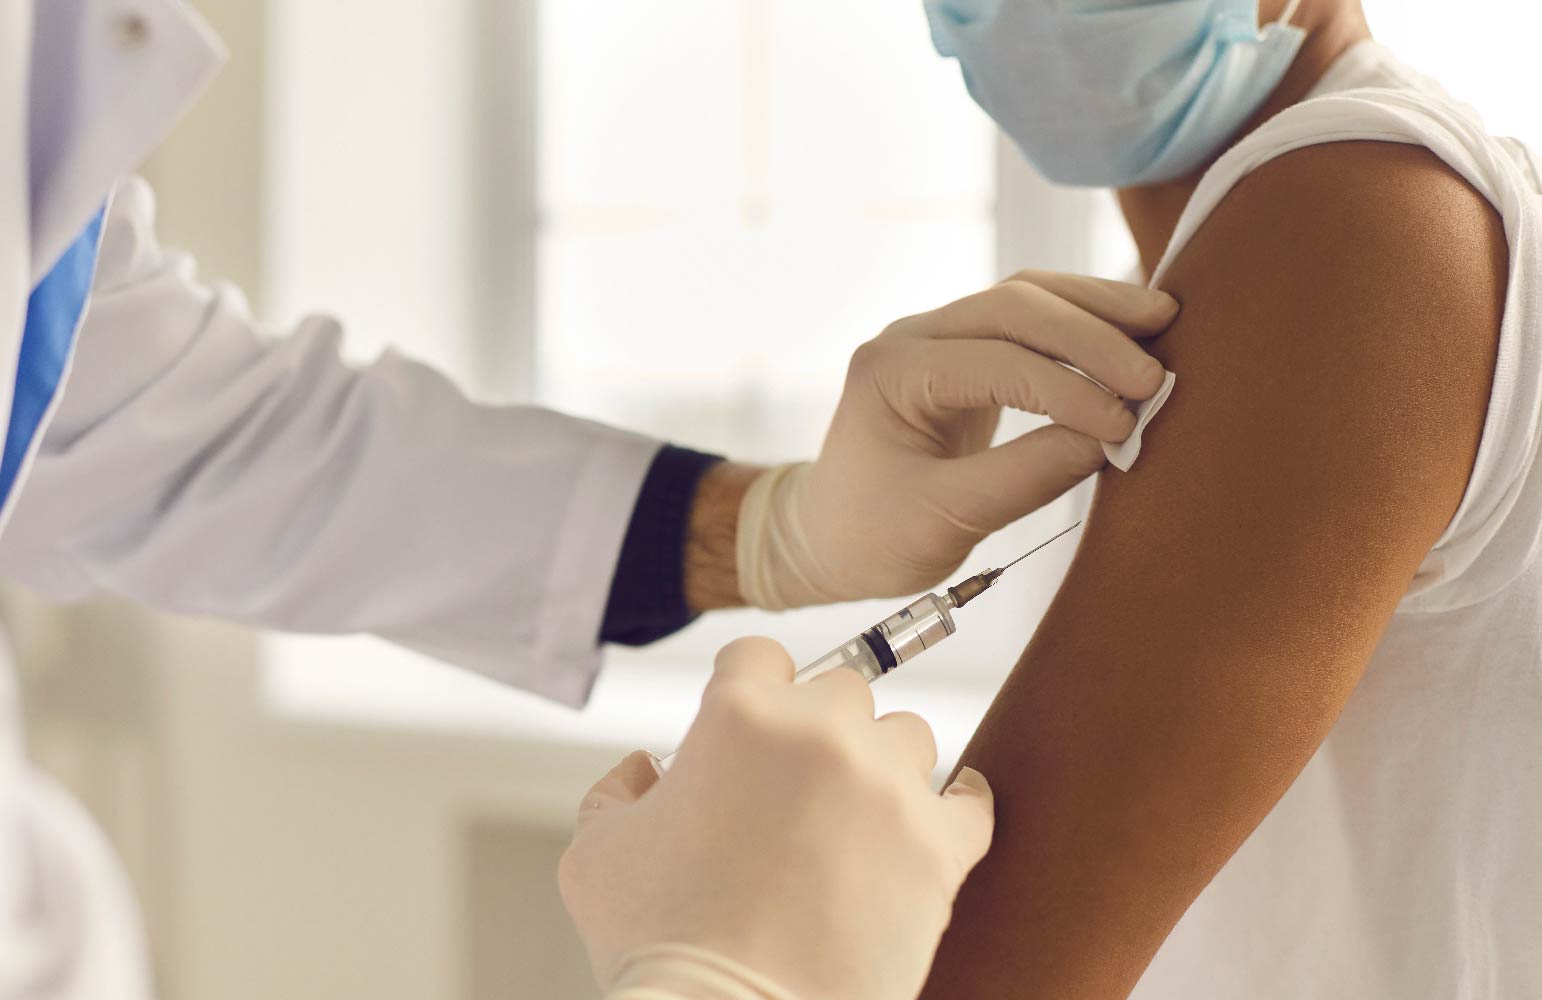 Employers May Require COVID-19 Vaccinations